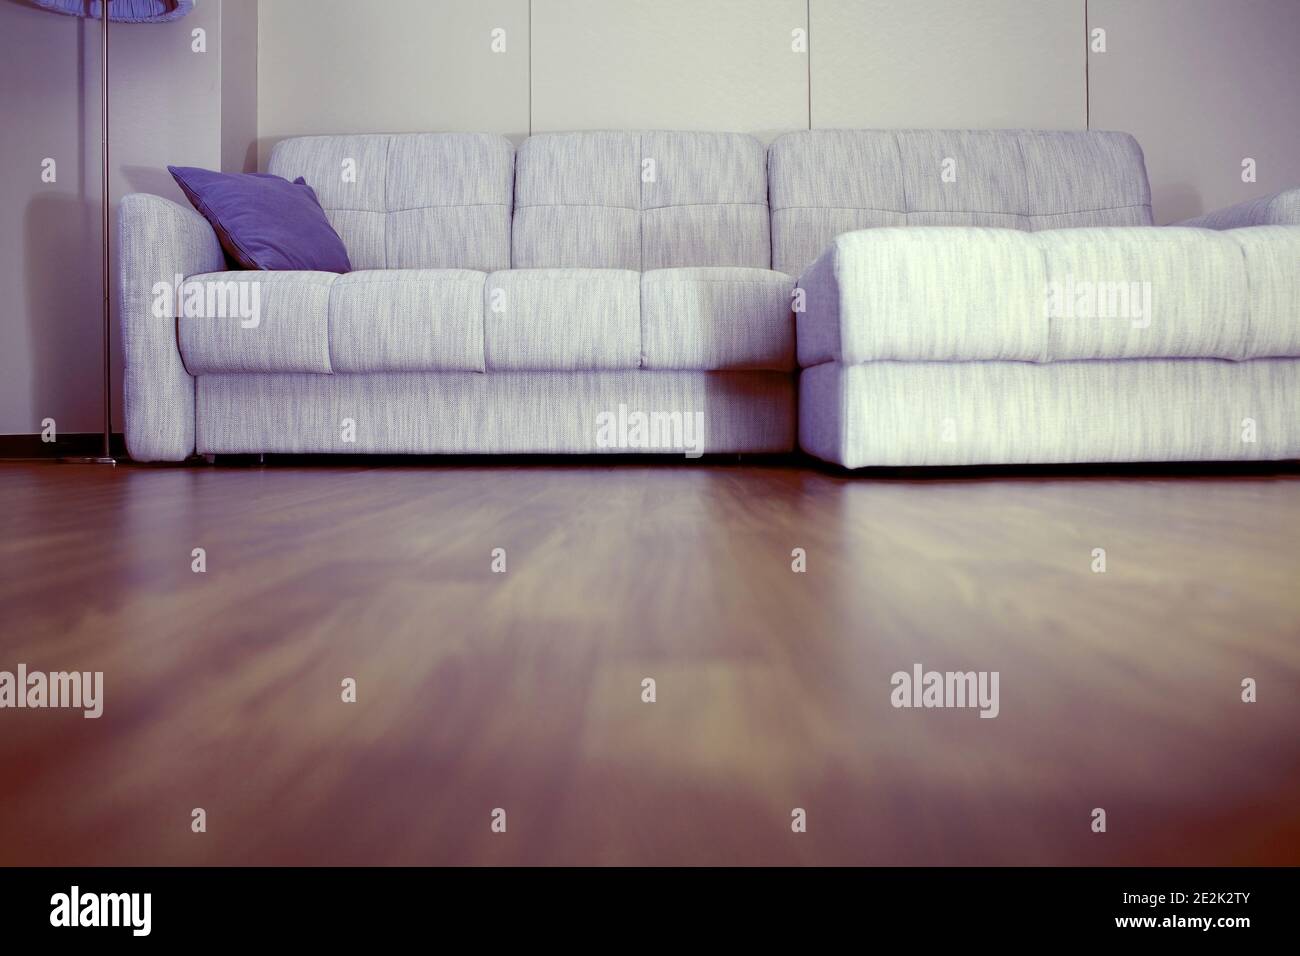 Home interior with sofa and parquet floor Stock Photo